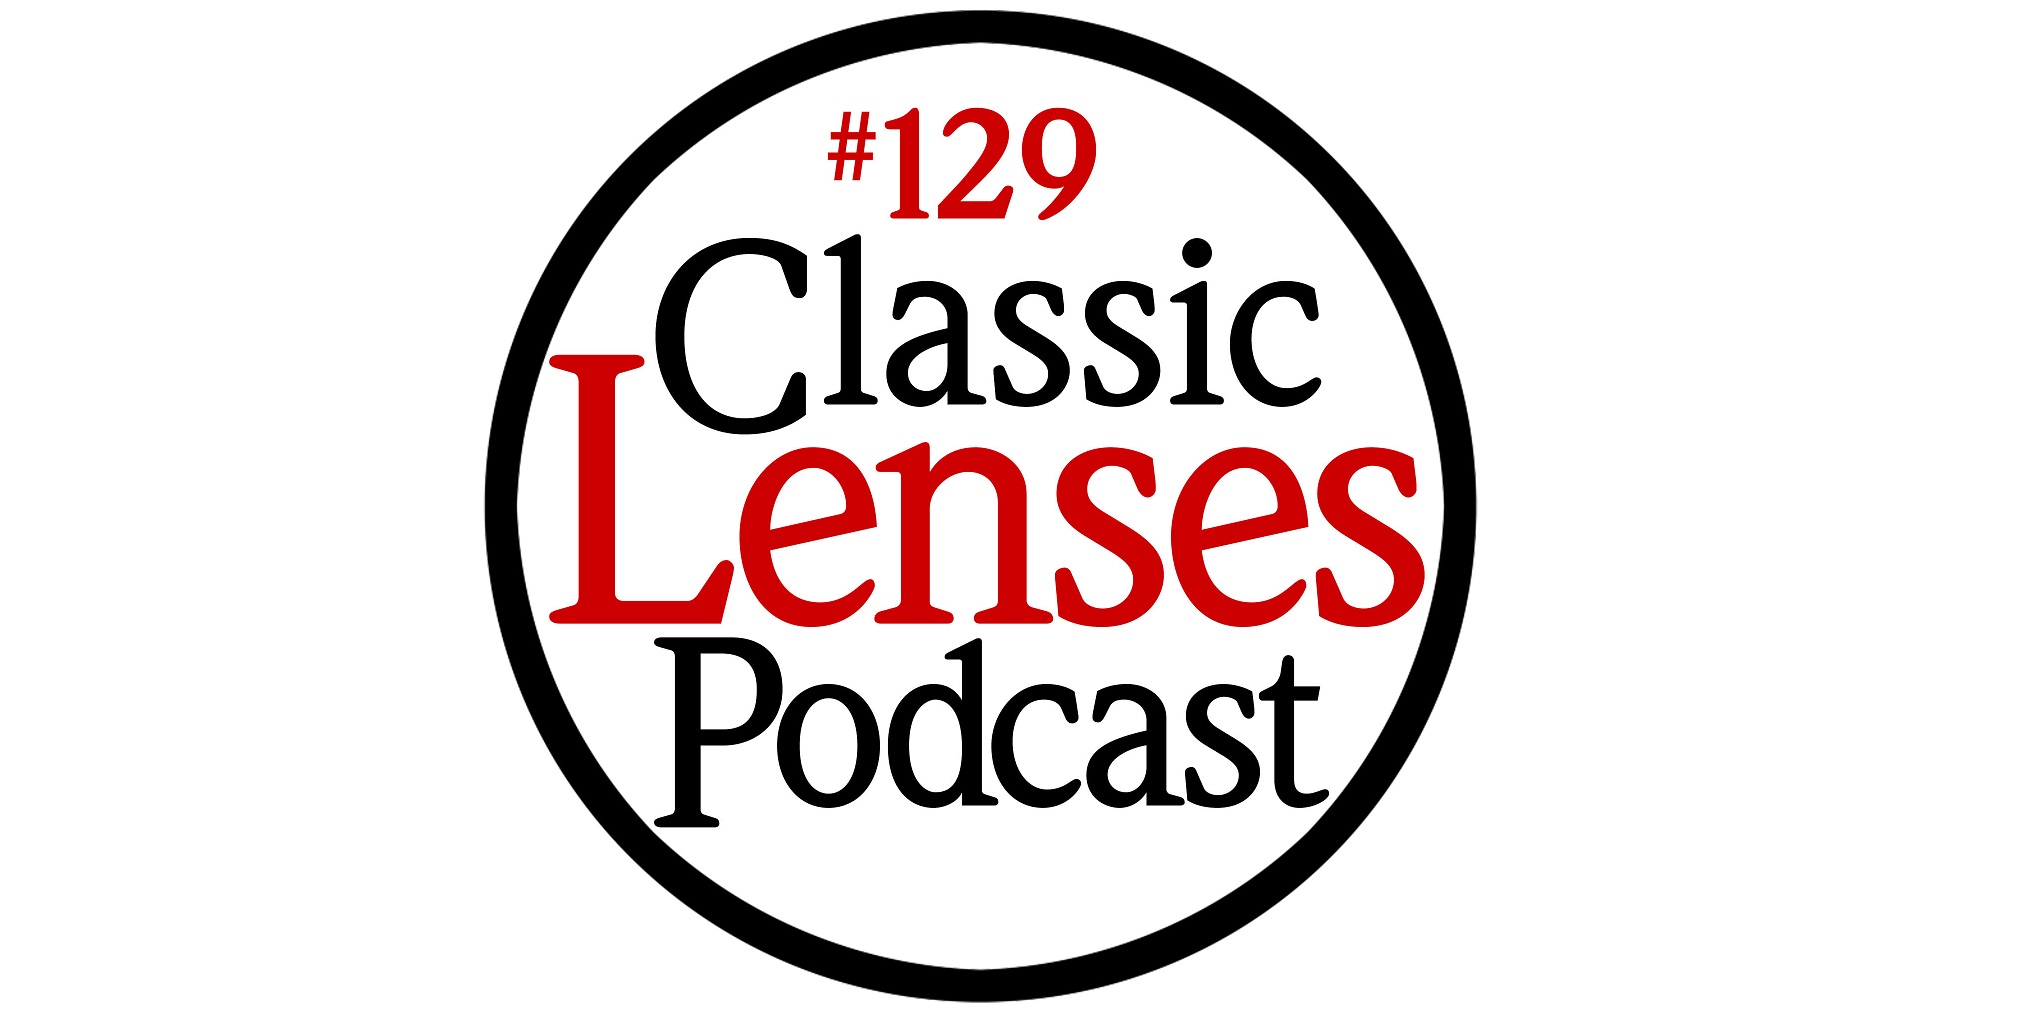 Classic Lenses Podcast #129 Featuring…Me!